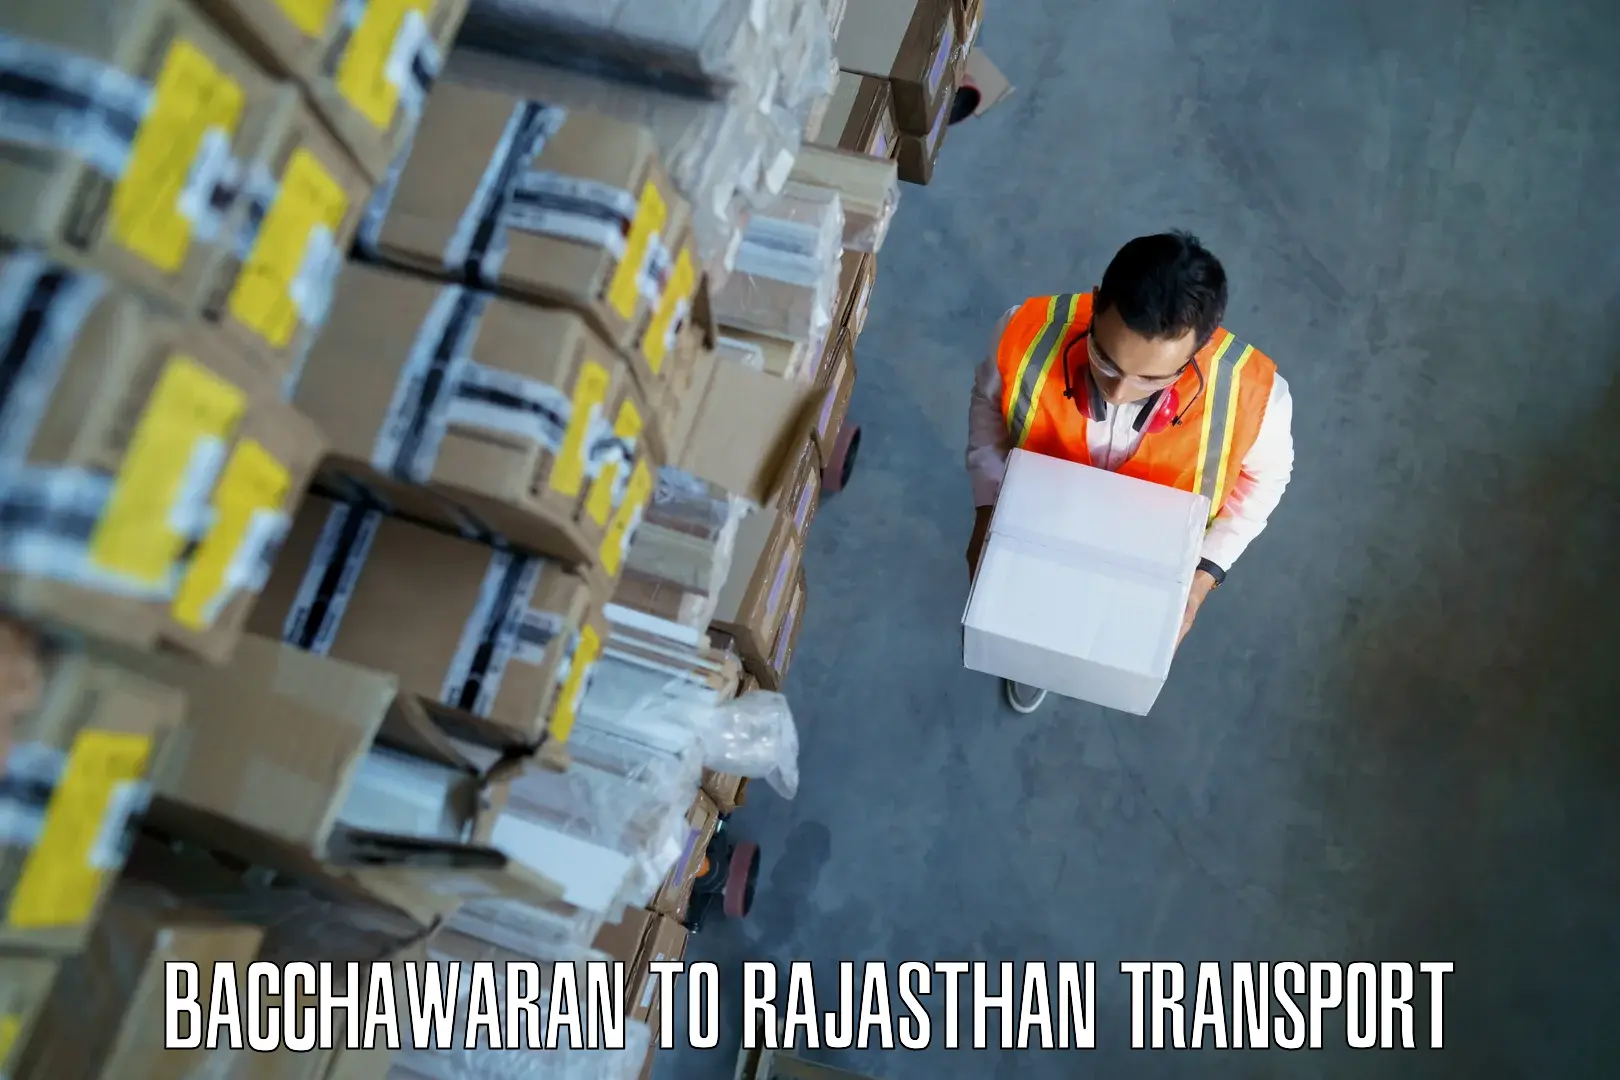 Delivery service in Bacchawaran to Yeswanthapur